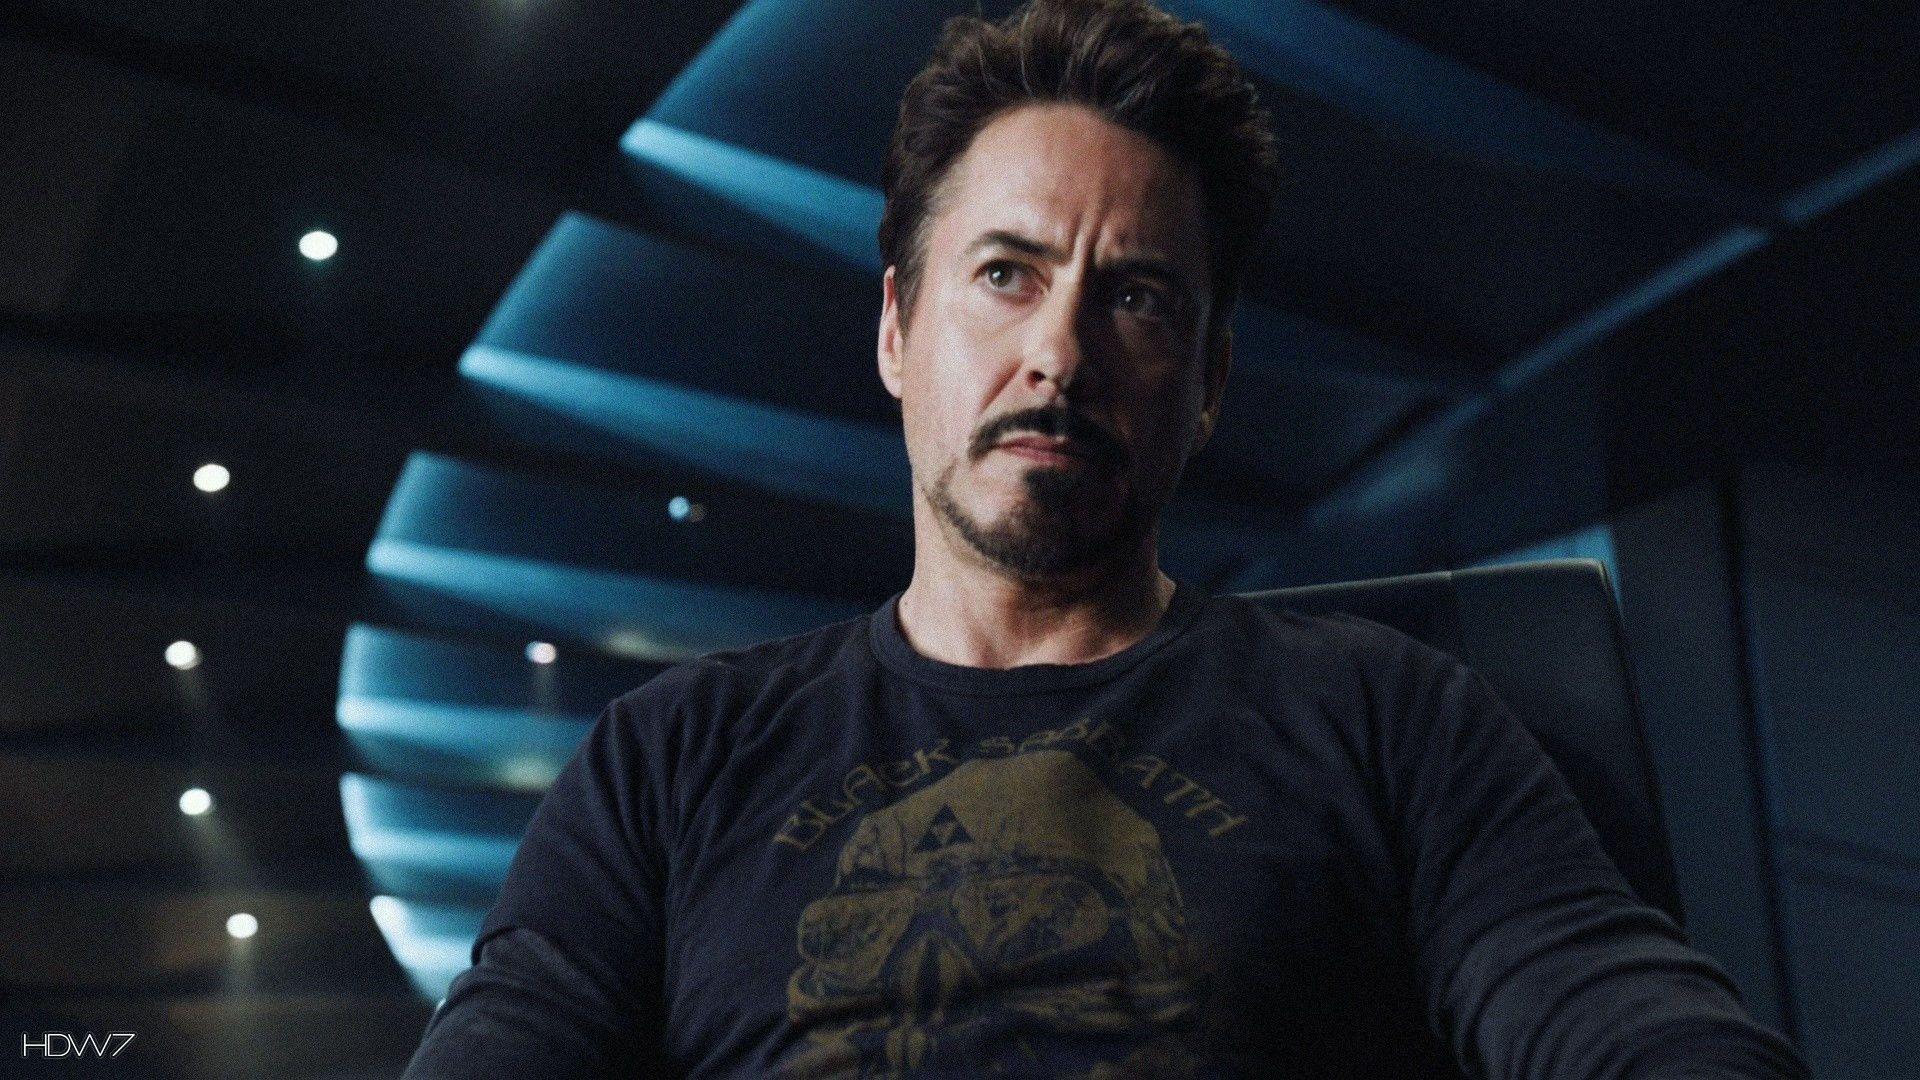 Download Tony Stark Smiling Images.